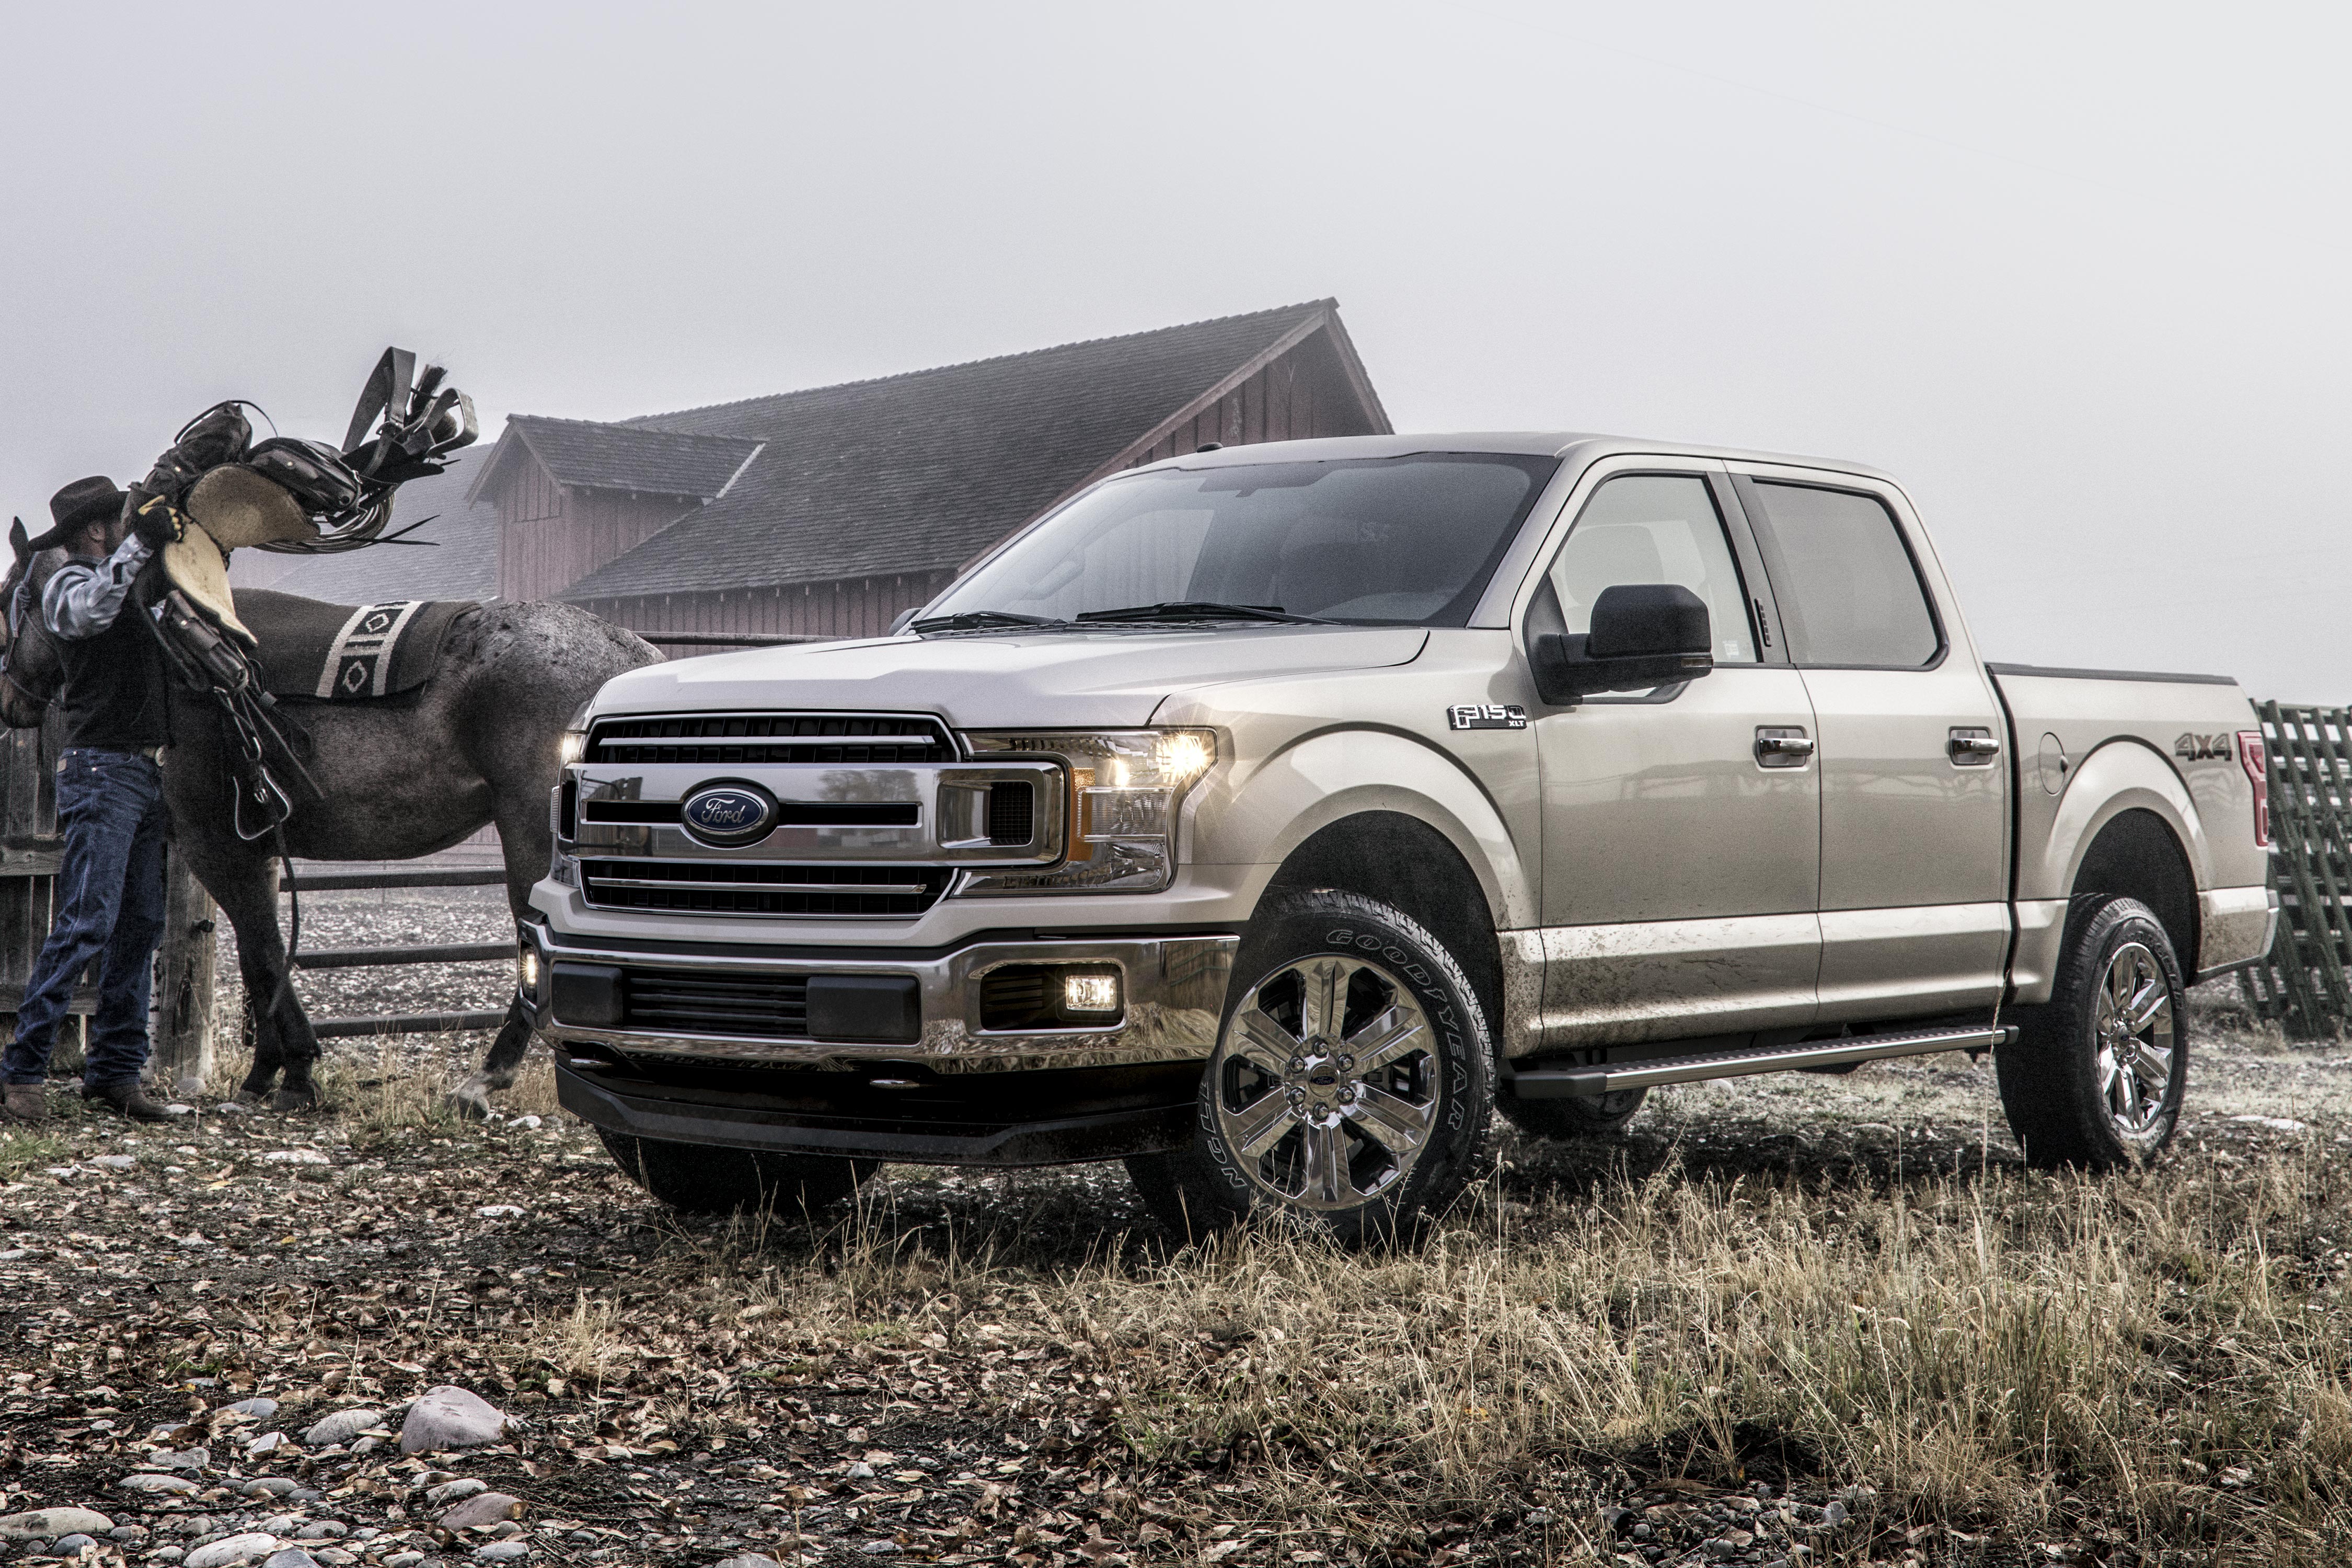 2018 Ford F-150 Pickup | Tougher, Smarter, More Capable Than Ever | Ford.com